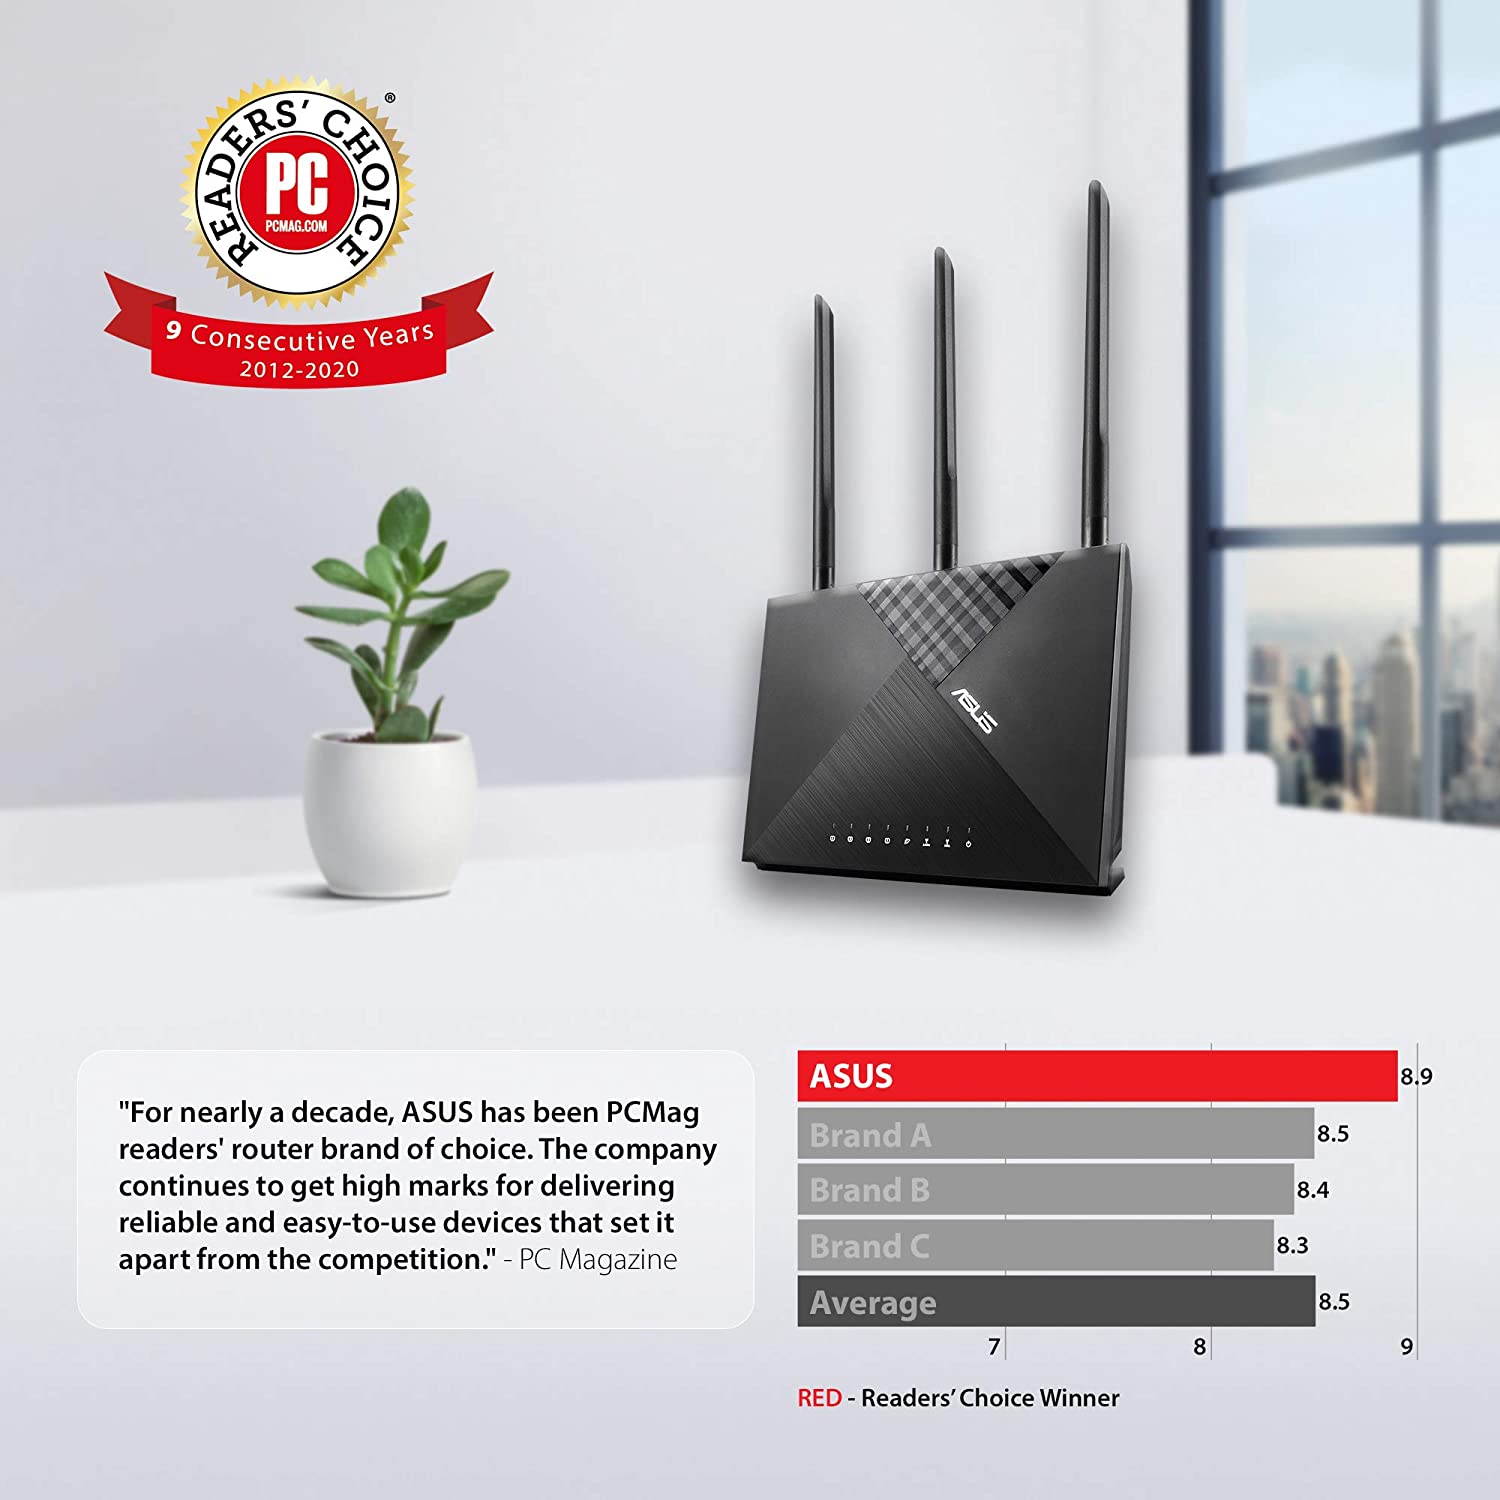 ASUS AC1750 WiFi Router - Dual Band Wireless Internet Router